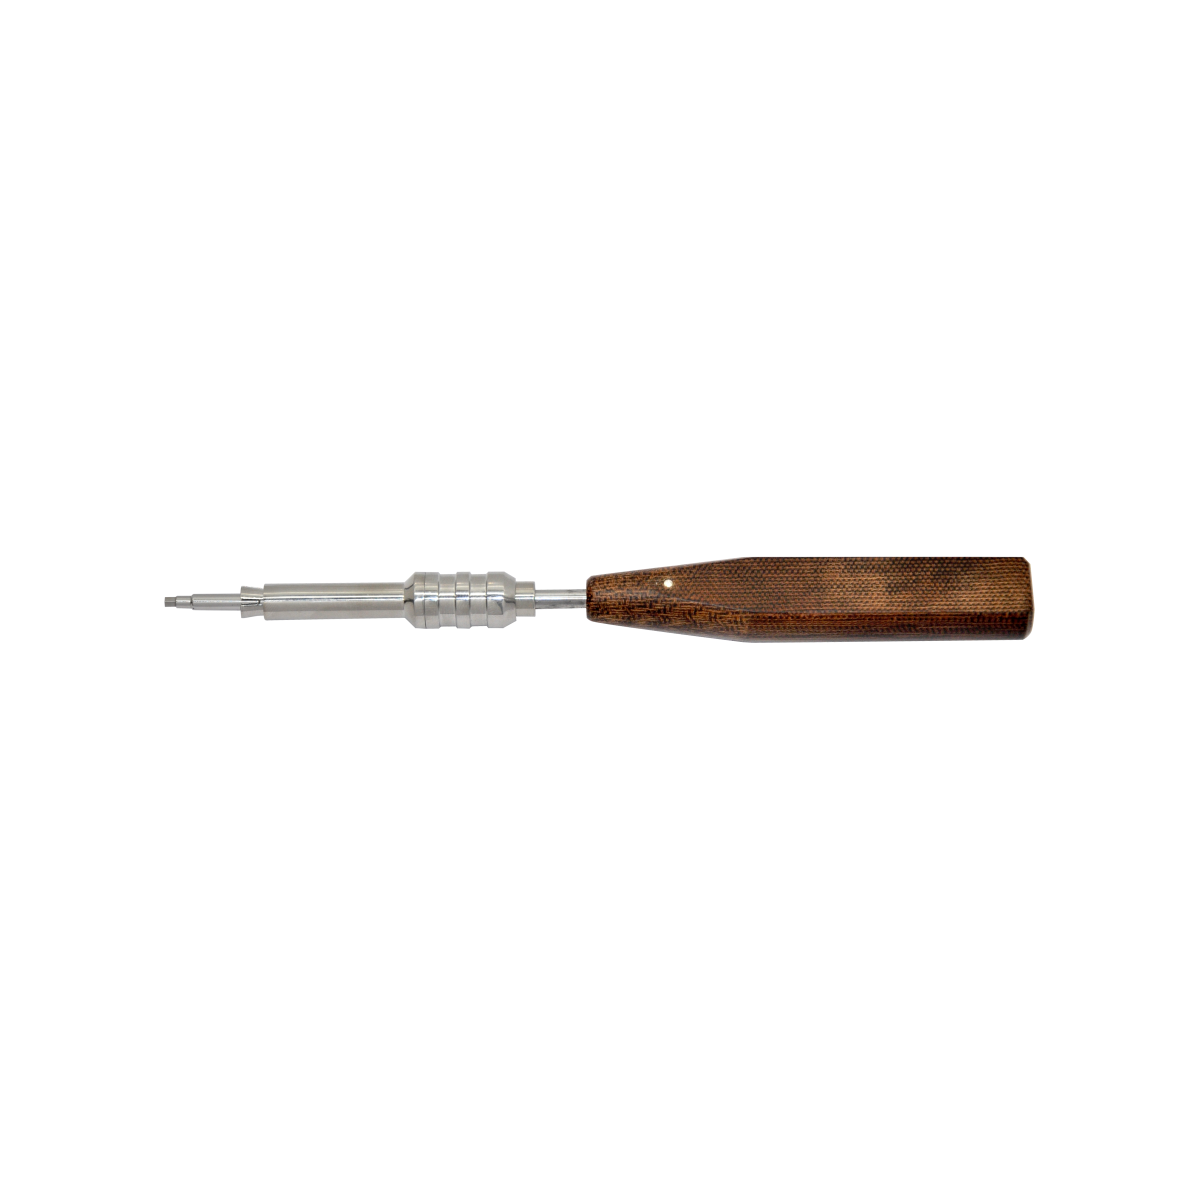 Hexagonal Screw Driver With Self Holding Sleeve 2.5mm Tip (for 2.7mm Cortical, 3.5mm & 4.0mm Locking Head screws)